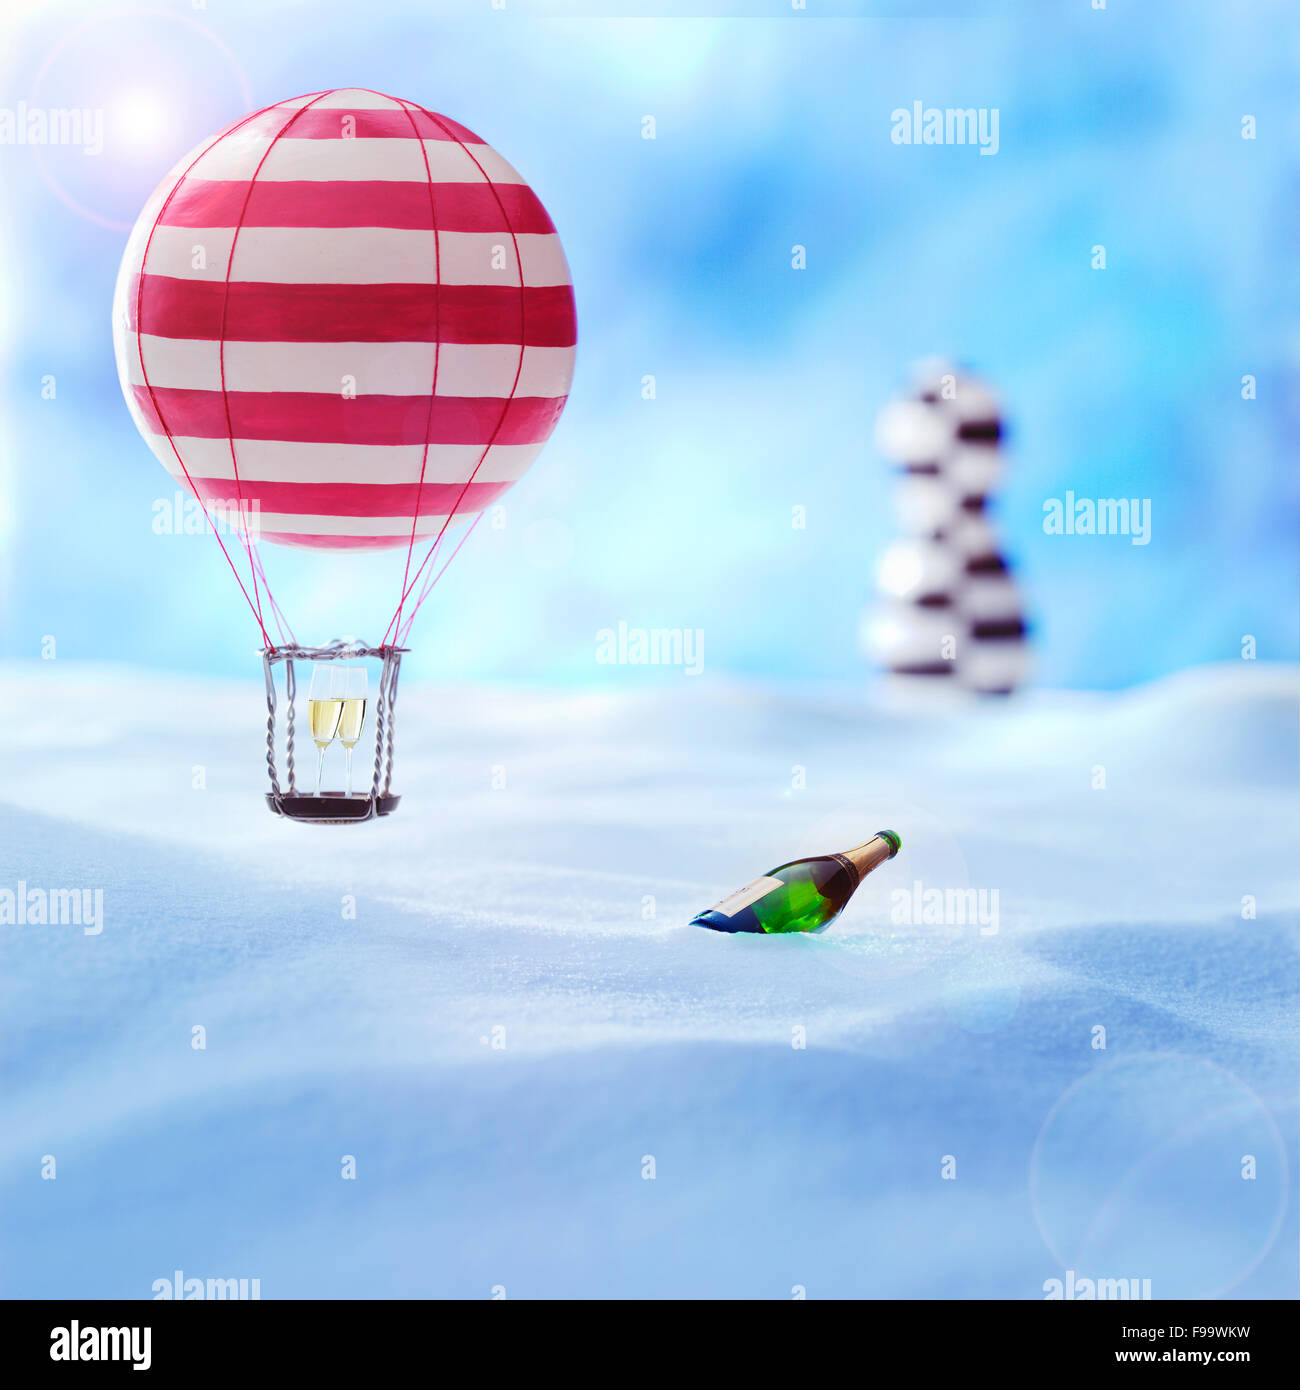 air baloon in the snow Stock Photo